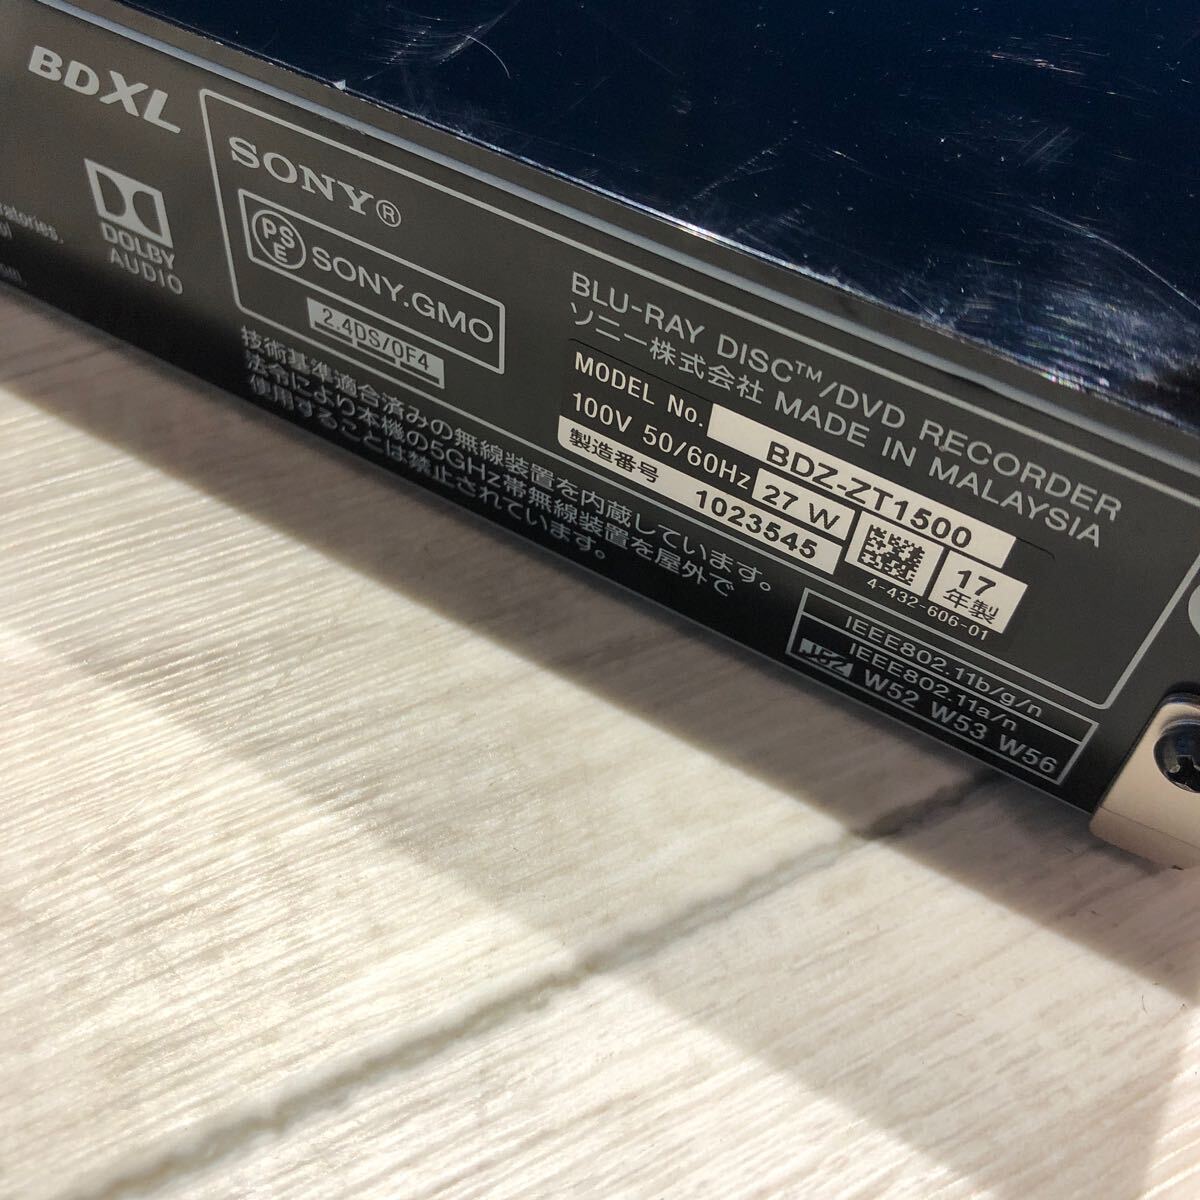 SONY Sony BDZ-ZT1500 4K Blu-ray HDD BD recorder Blue-ray disk recorder 2017 year made power cord attaching electrification OK viewing OK present condition goods 